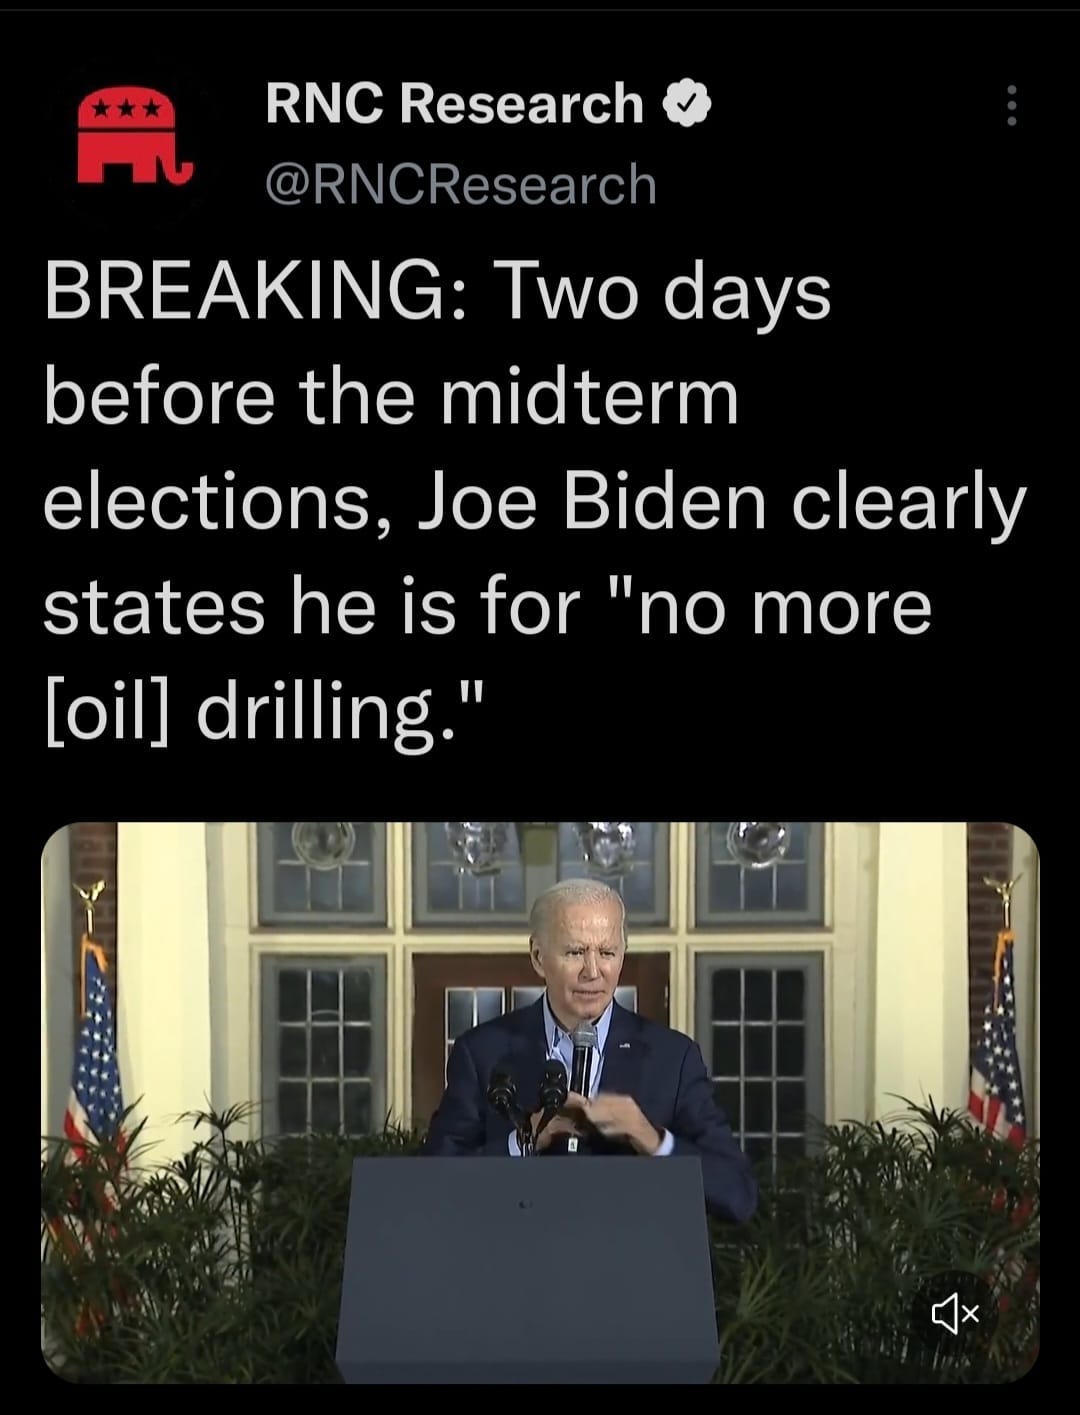 May be a Twitter screenshot of 1 person and text that says 'RNC Research @RNCResearch BREAKING: Two days before the midterm elections, Joe Biden clearly states he is fo "no more [oil] drilling."'